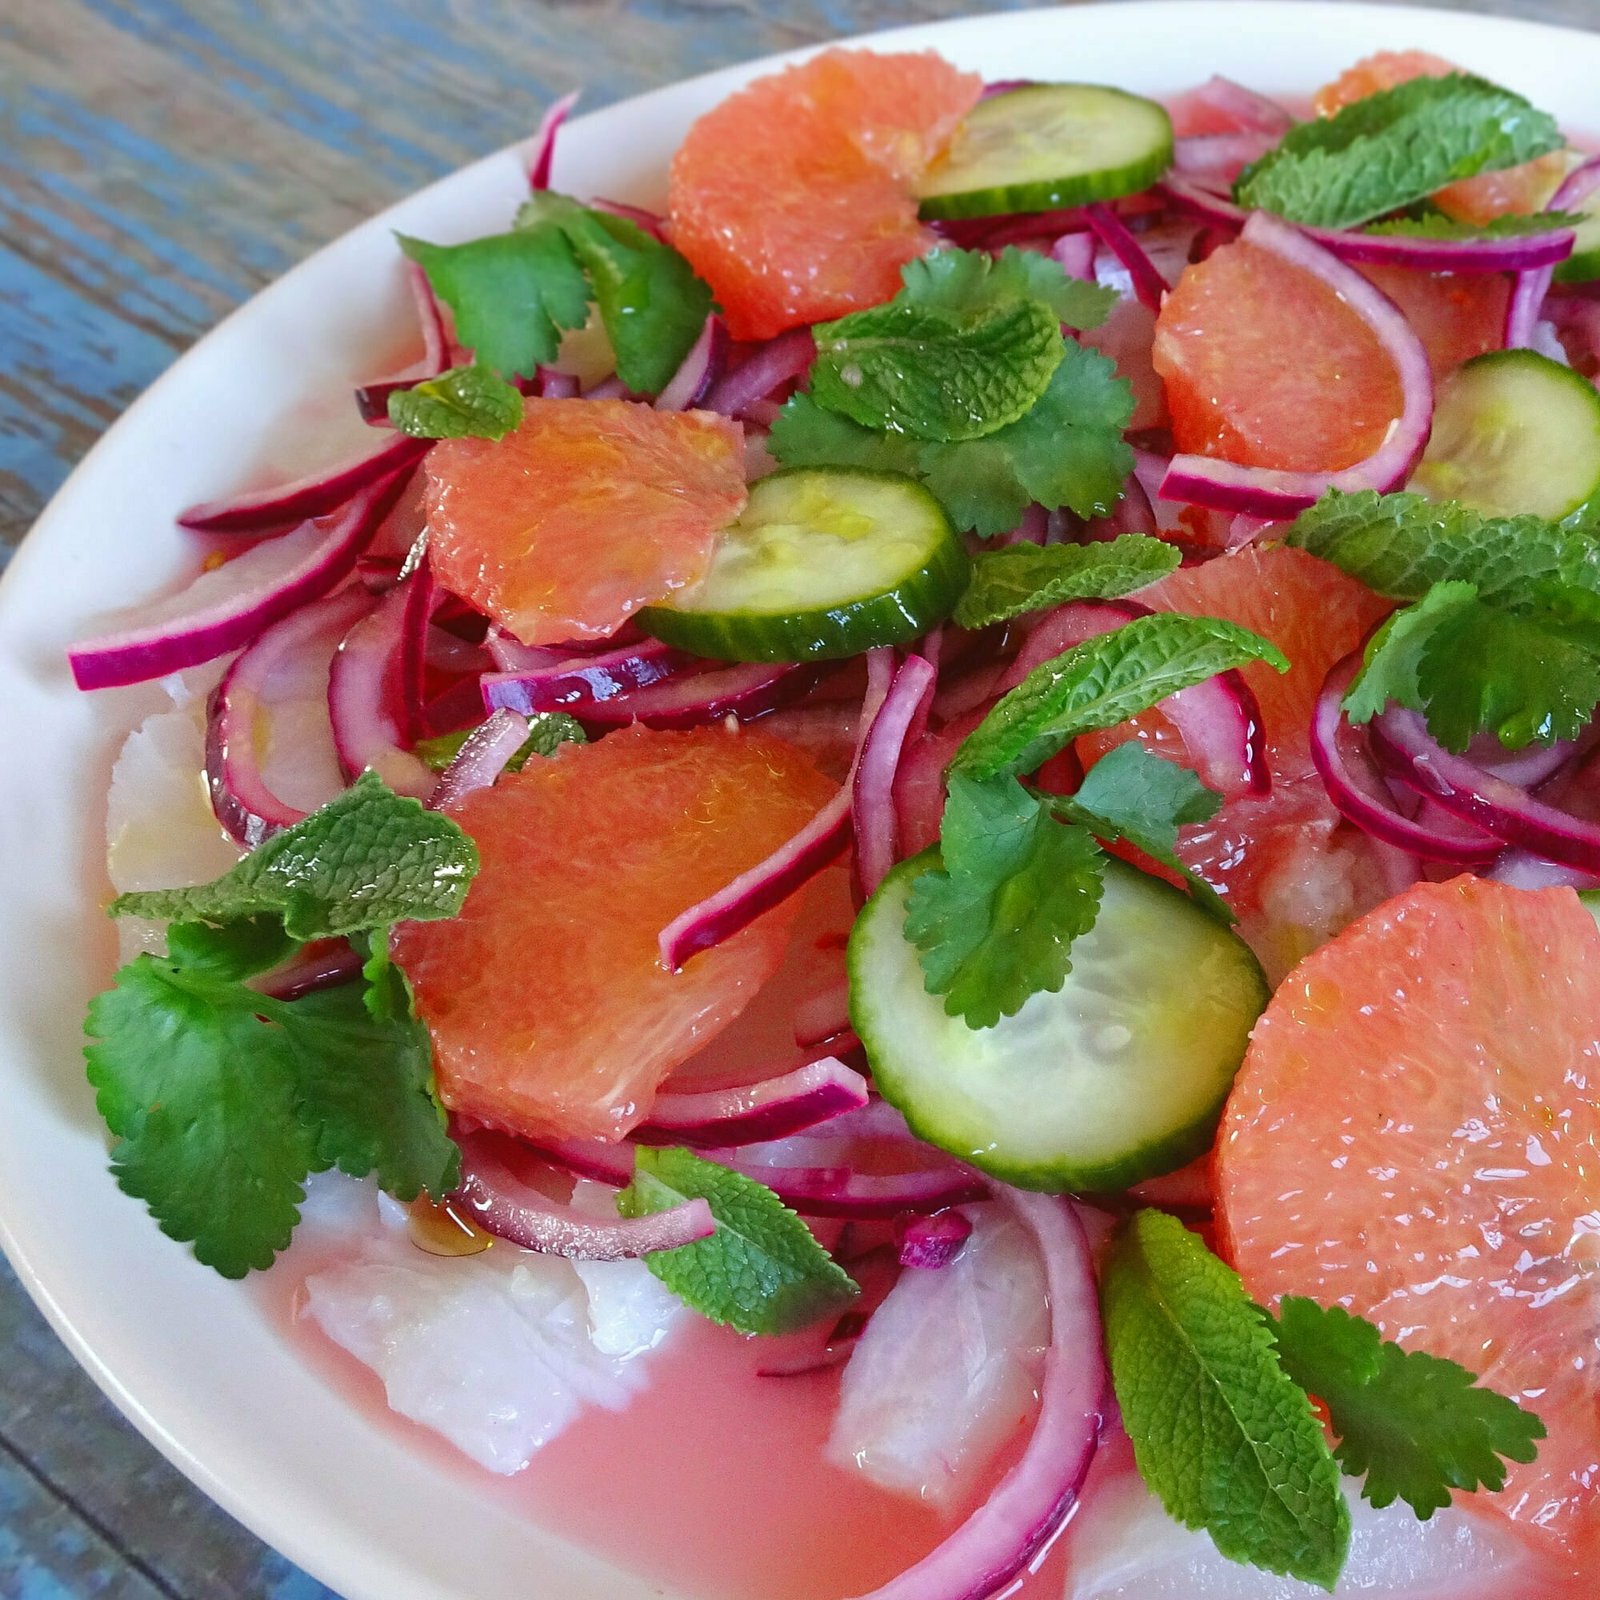 White fish ceviche sits on a white plate garnished with finely sliced red onion, pink grapefruit wedges, and some sprigs of mint and cilantro